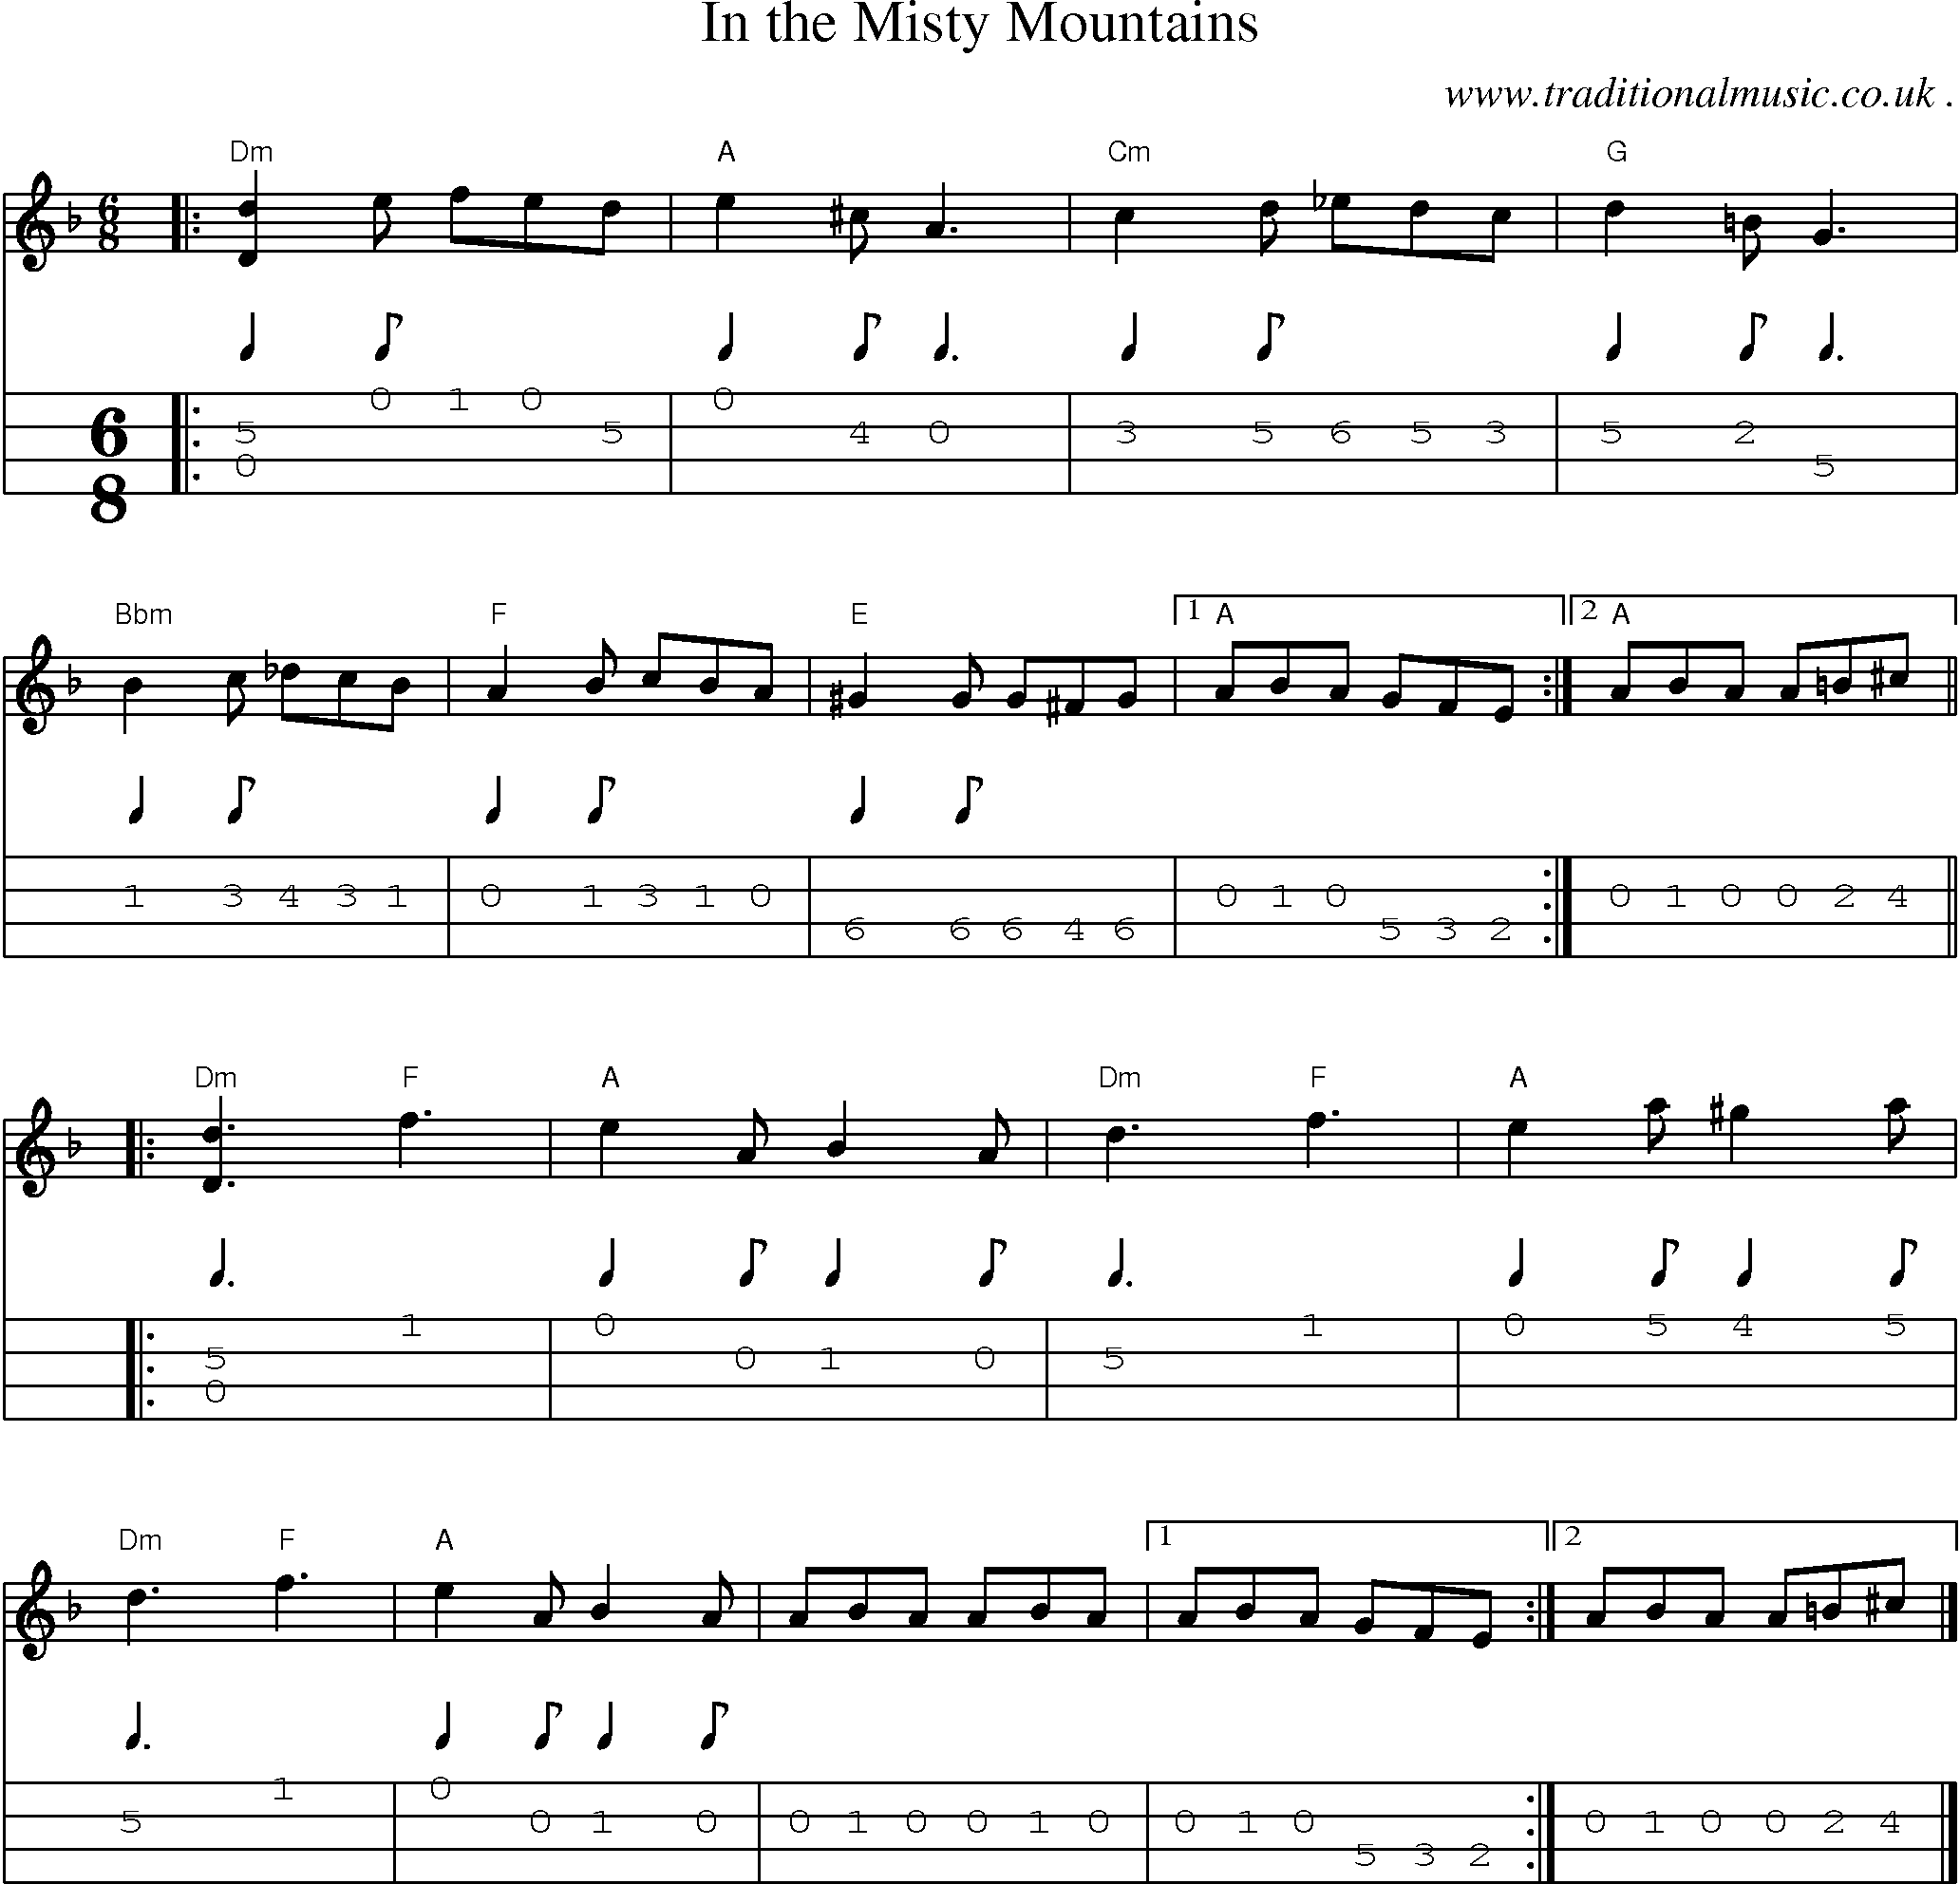 Music Score and Guitar Tabs for In The Misty Mountains